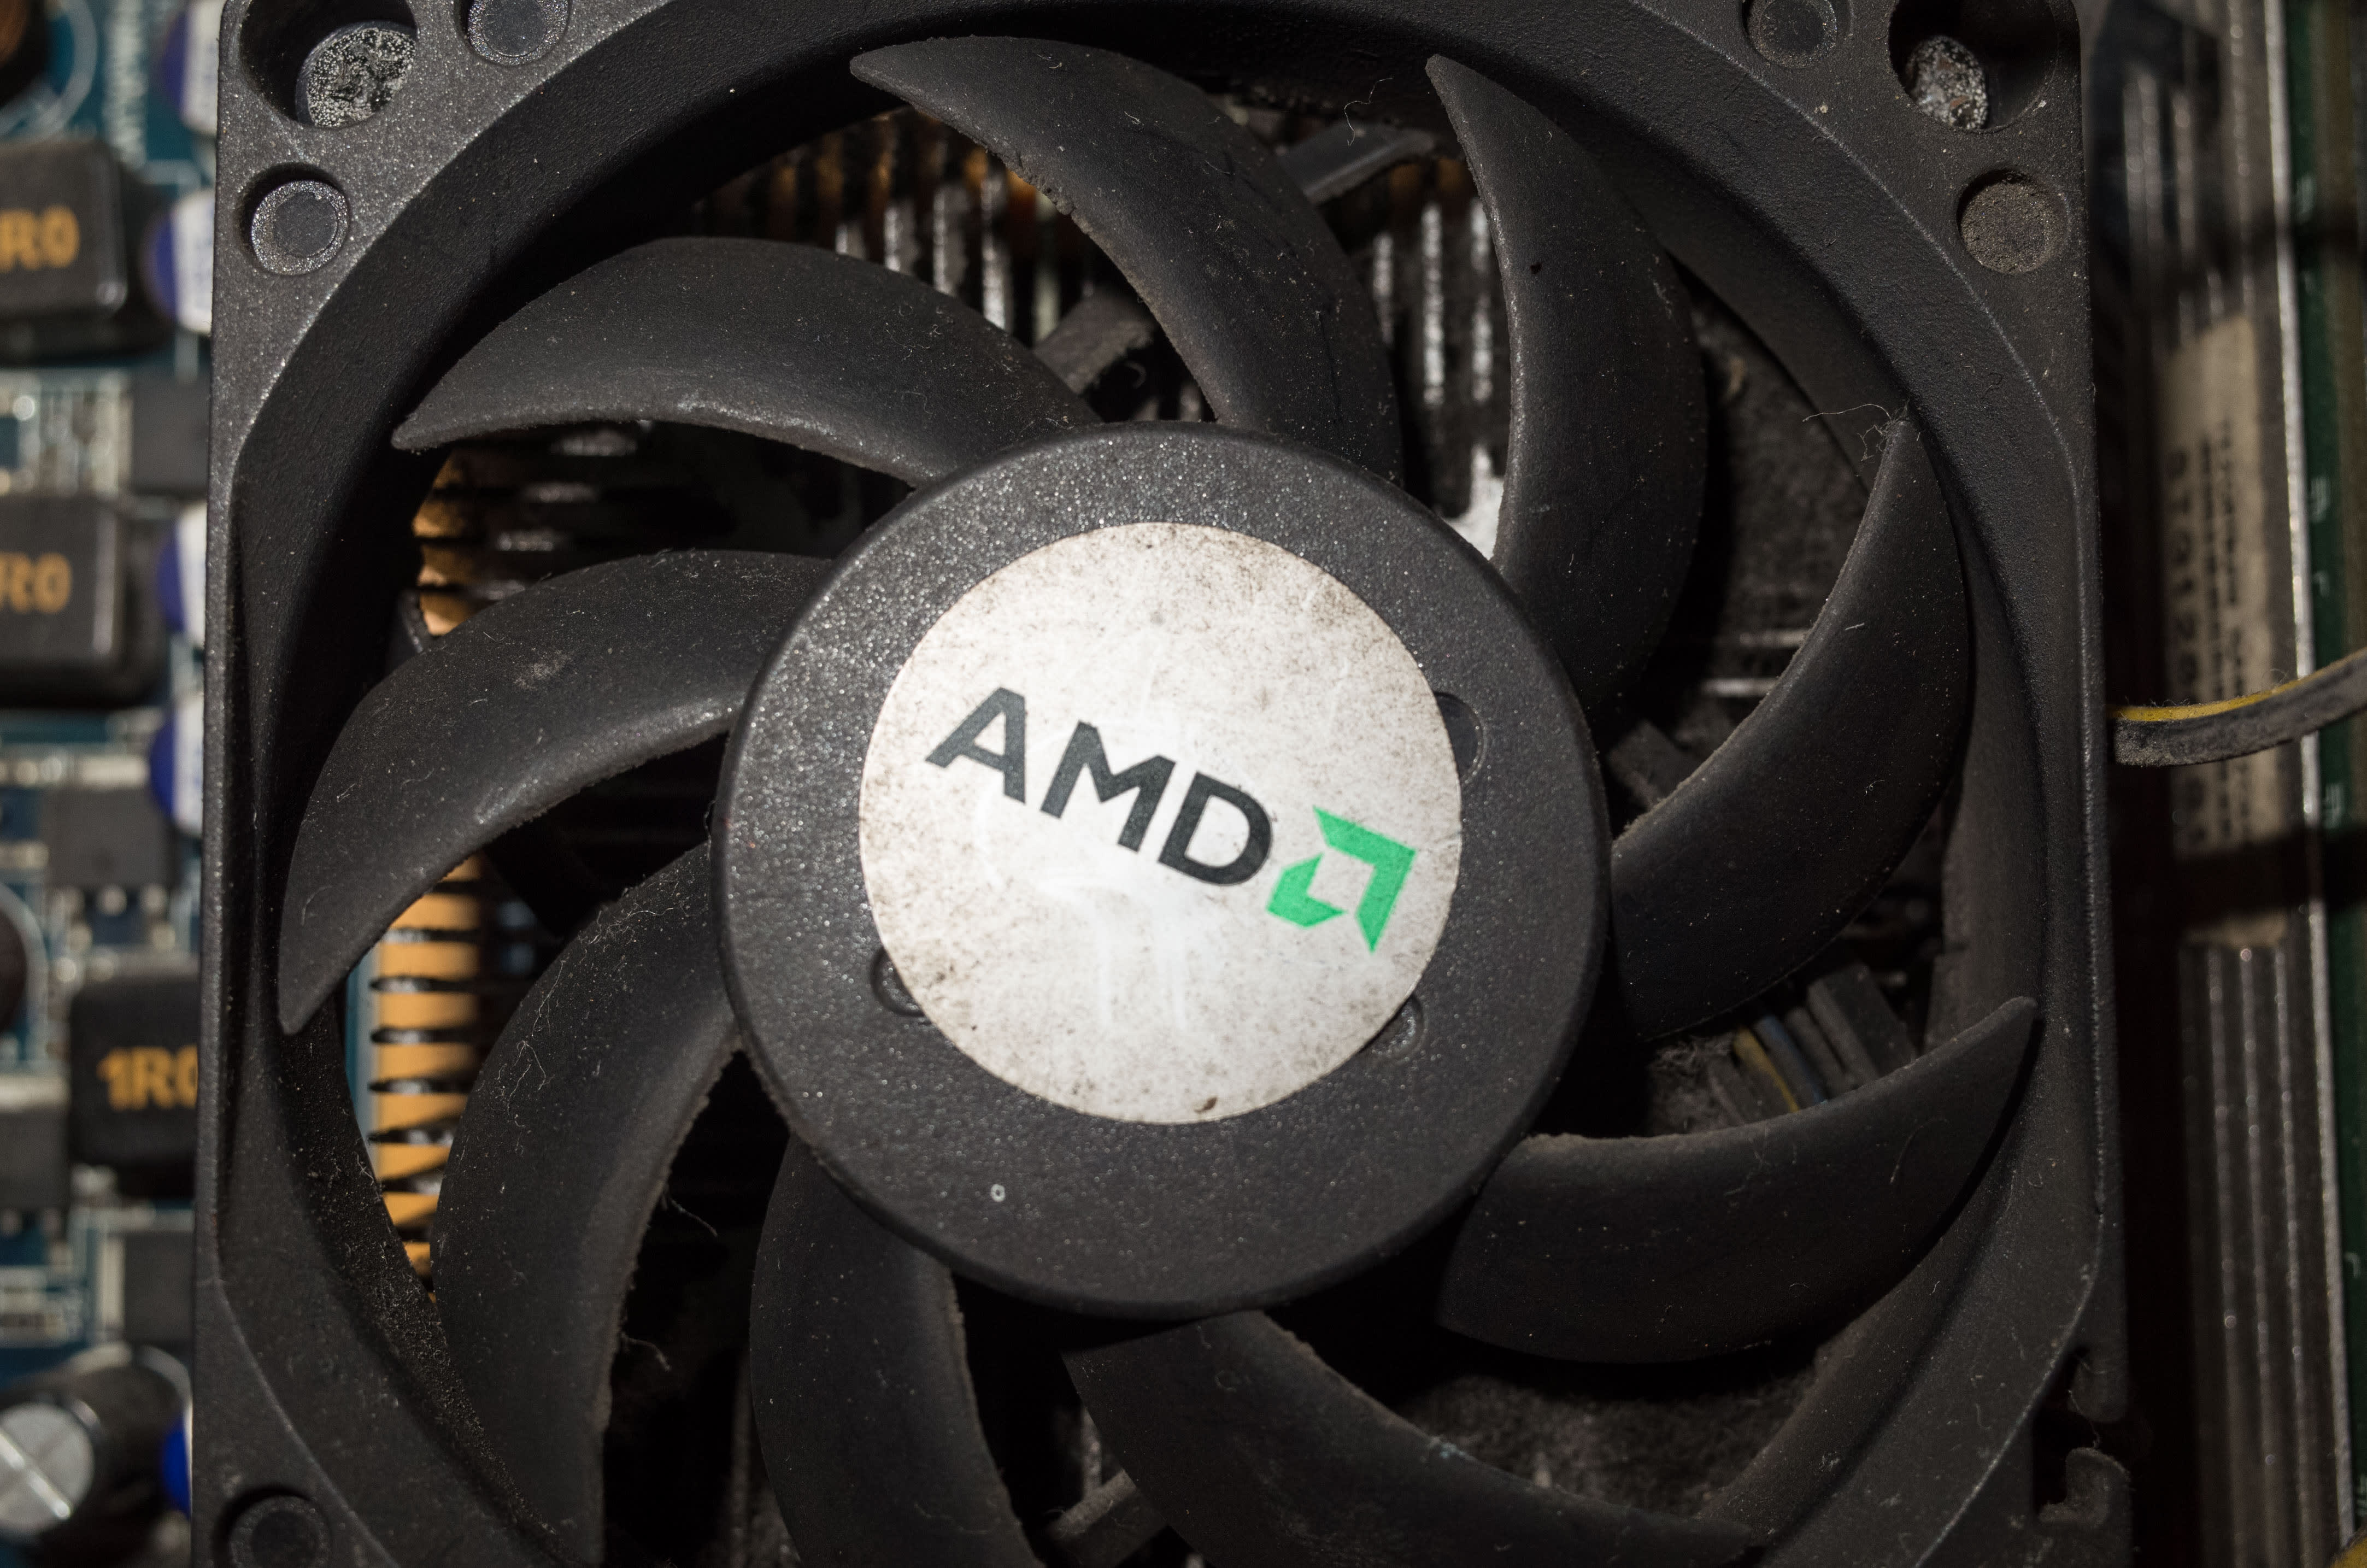 AMD can ride the AI ​​wave to take more market share from rivals, Bank of America says